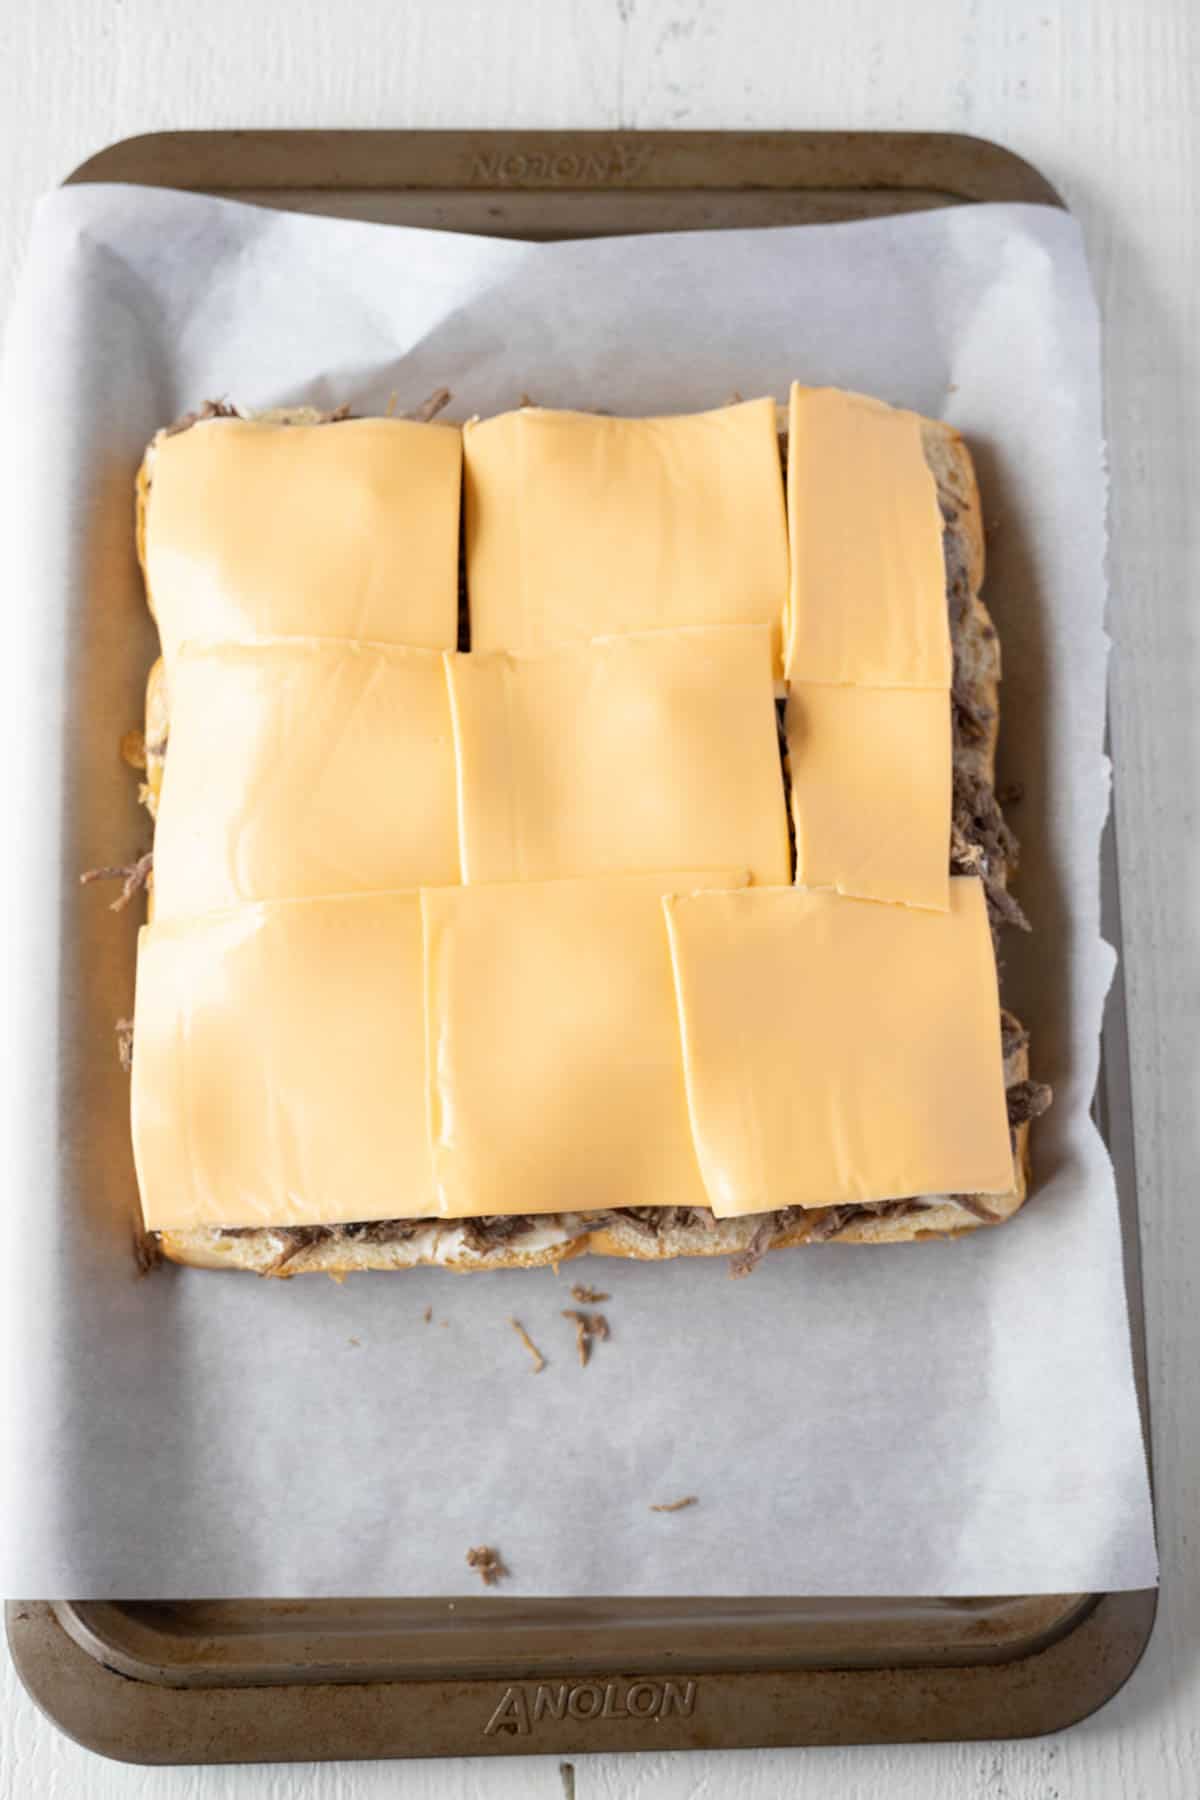 Roast beef sliders with a layer of slices of American cheddar cheese layered over the roast beef.